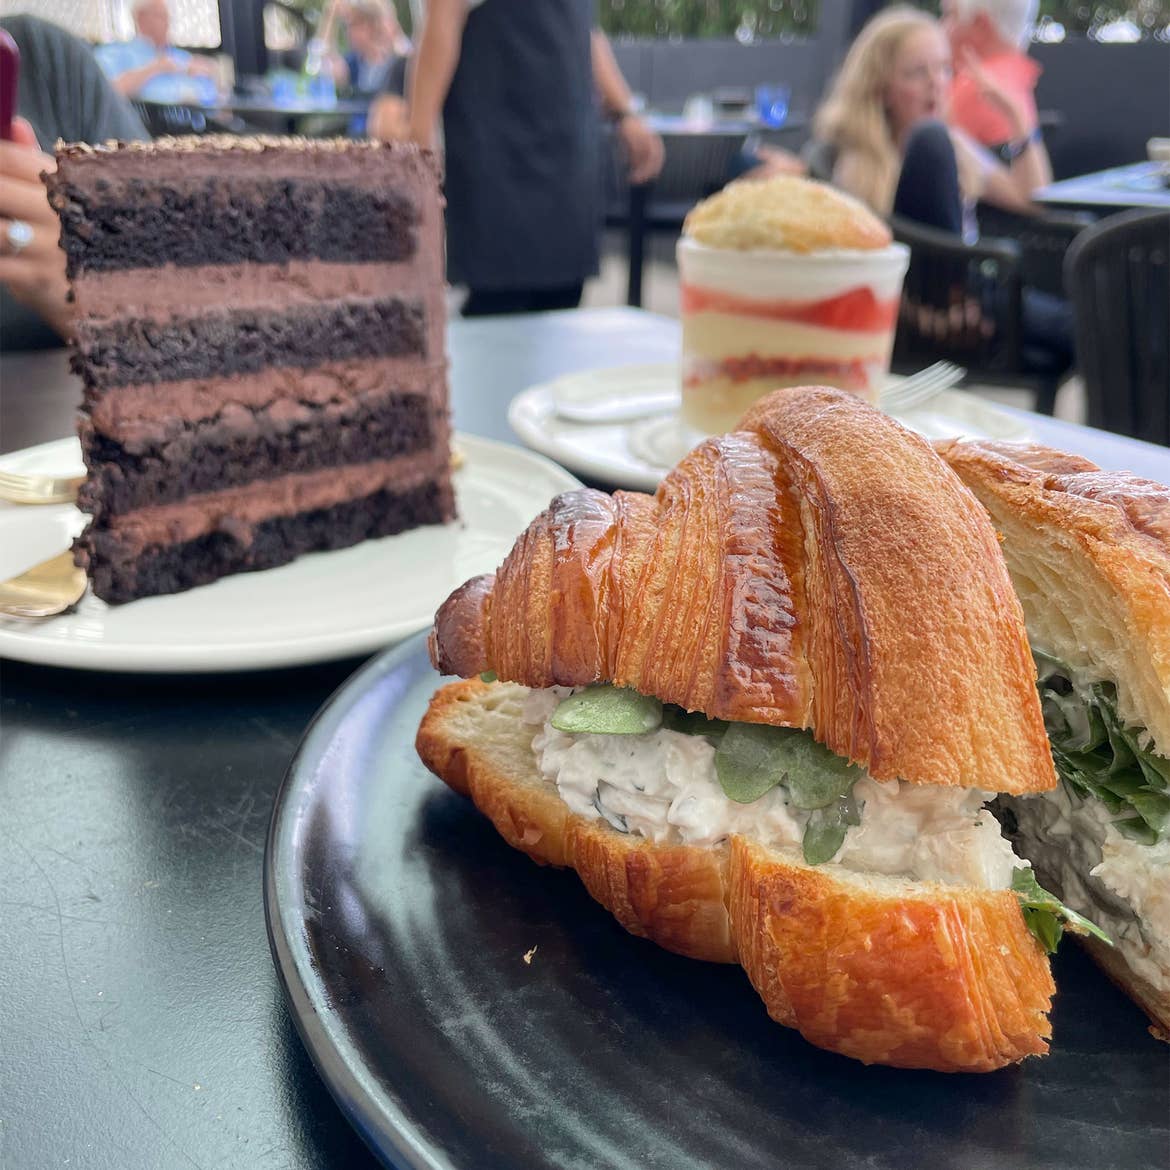 A chocolate layered cake, a parfait and a croissant sandwich are placed on various colored plates on an outdoor dining table.